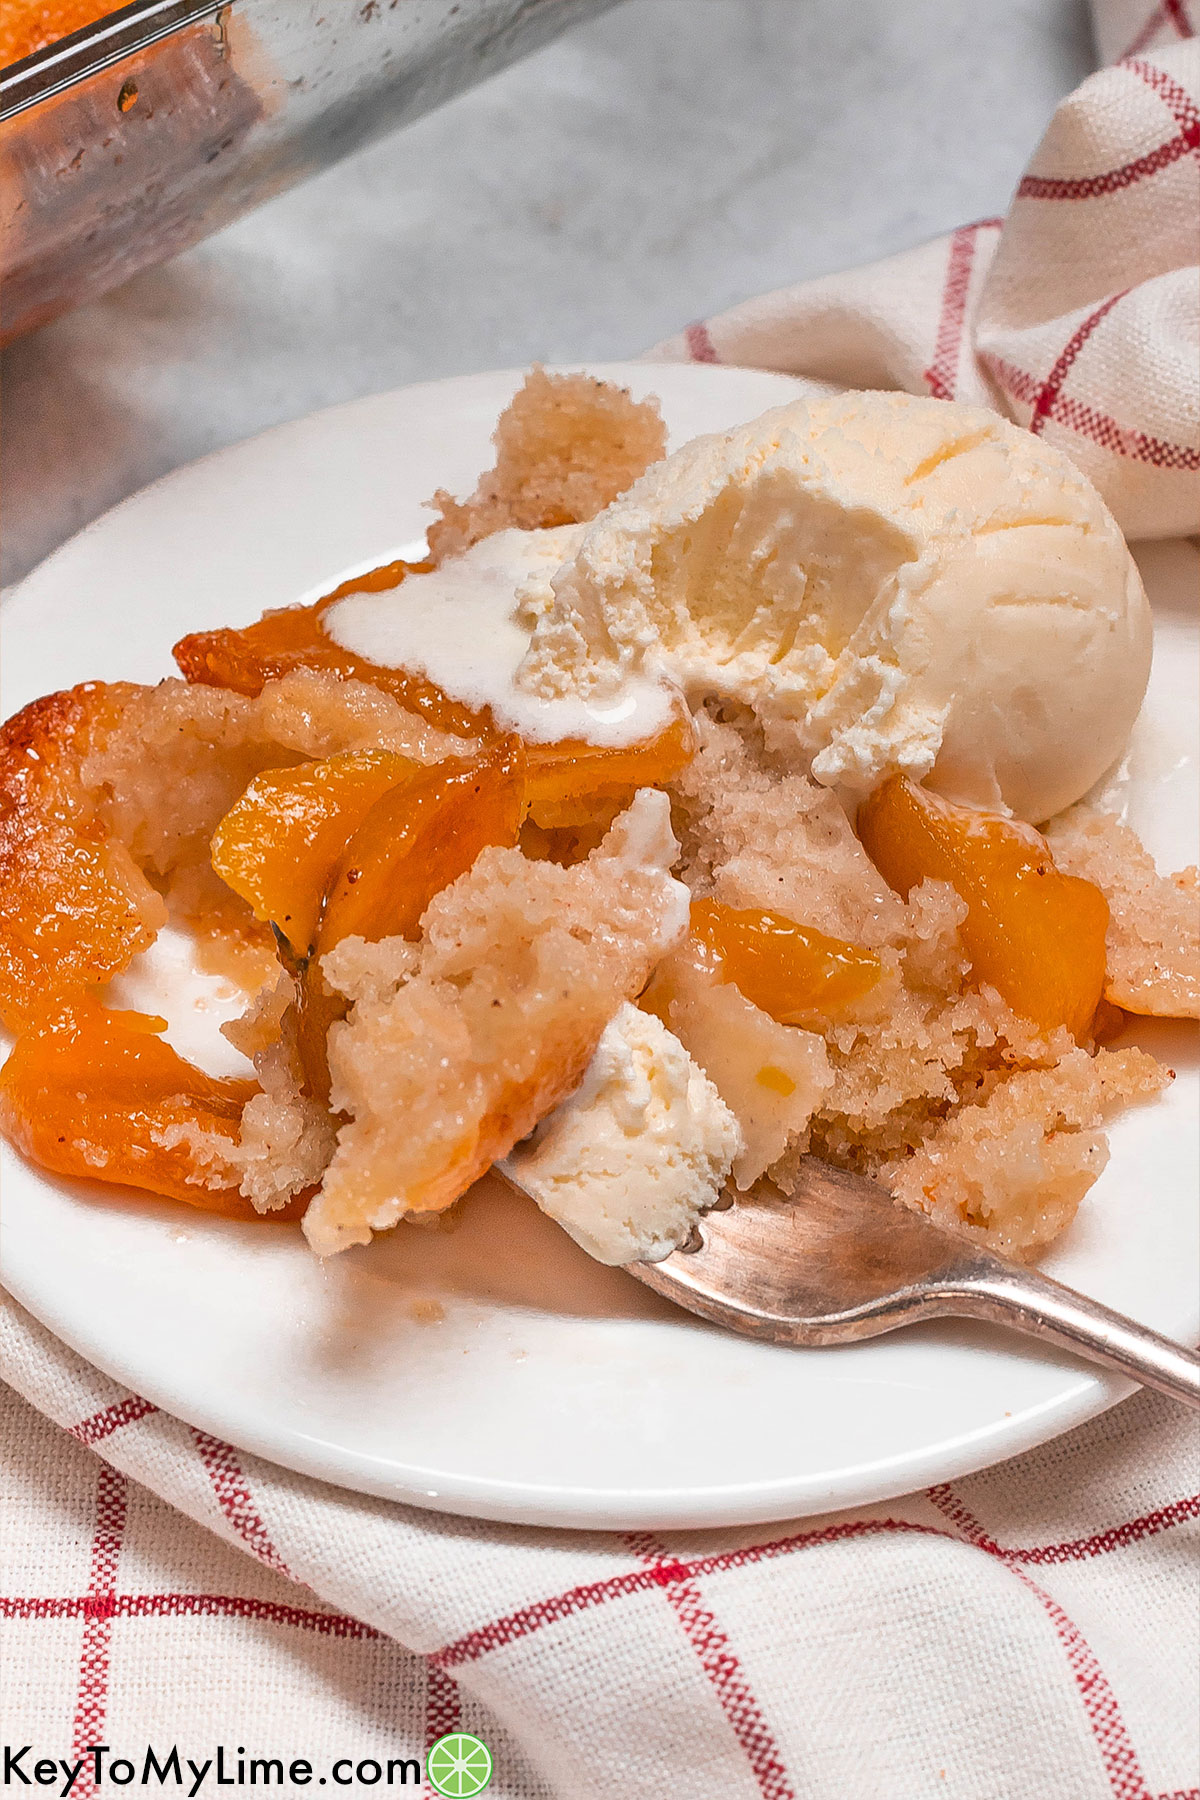 A serving of peach cobbler with a bite missing on a small white plate.